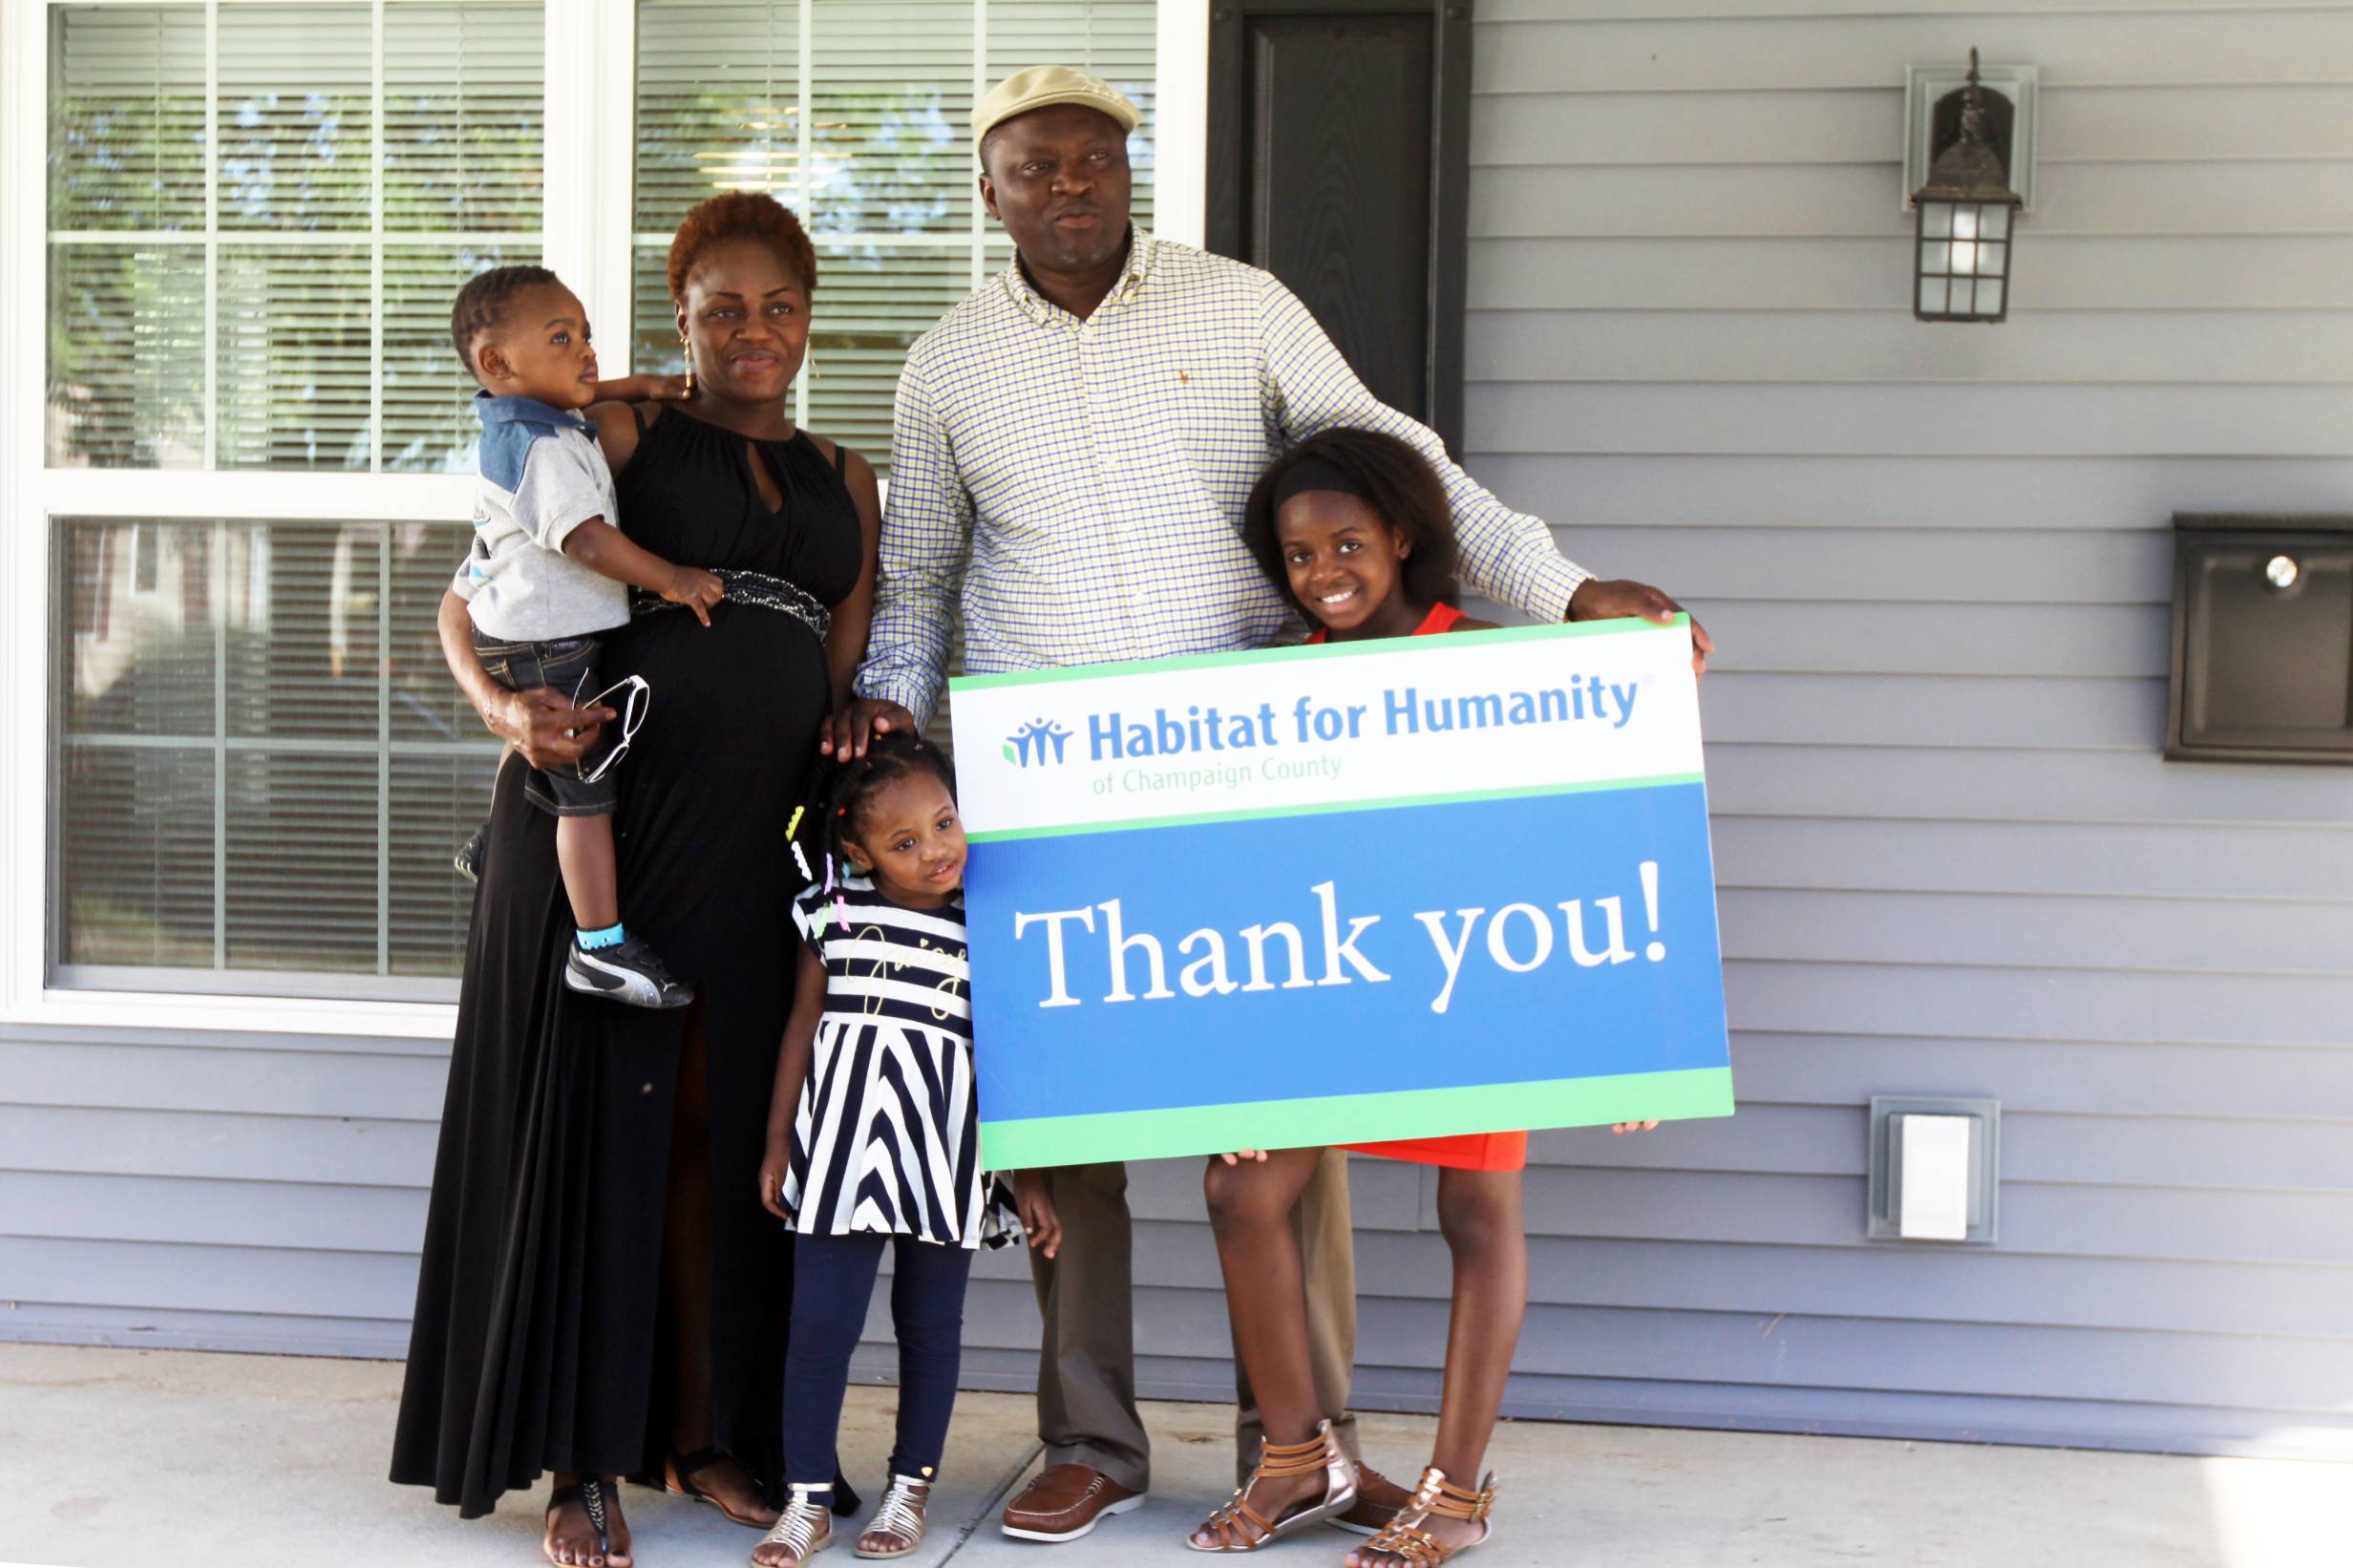 From 1992 to now: Habitat for Humanity turns 25